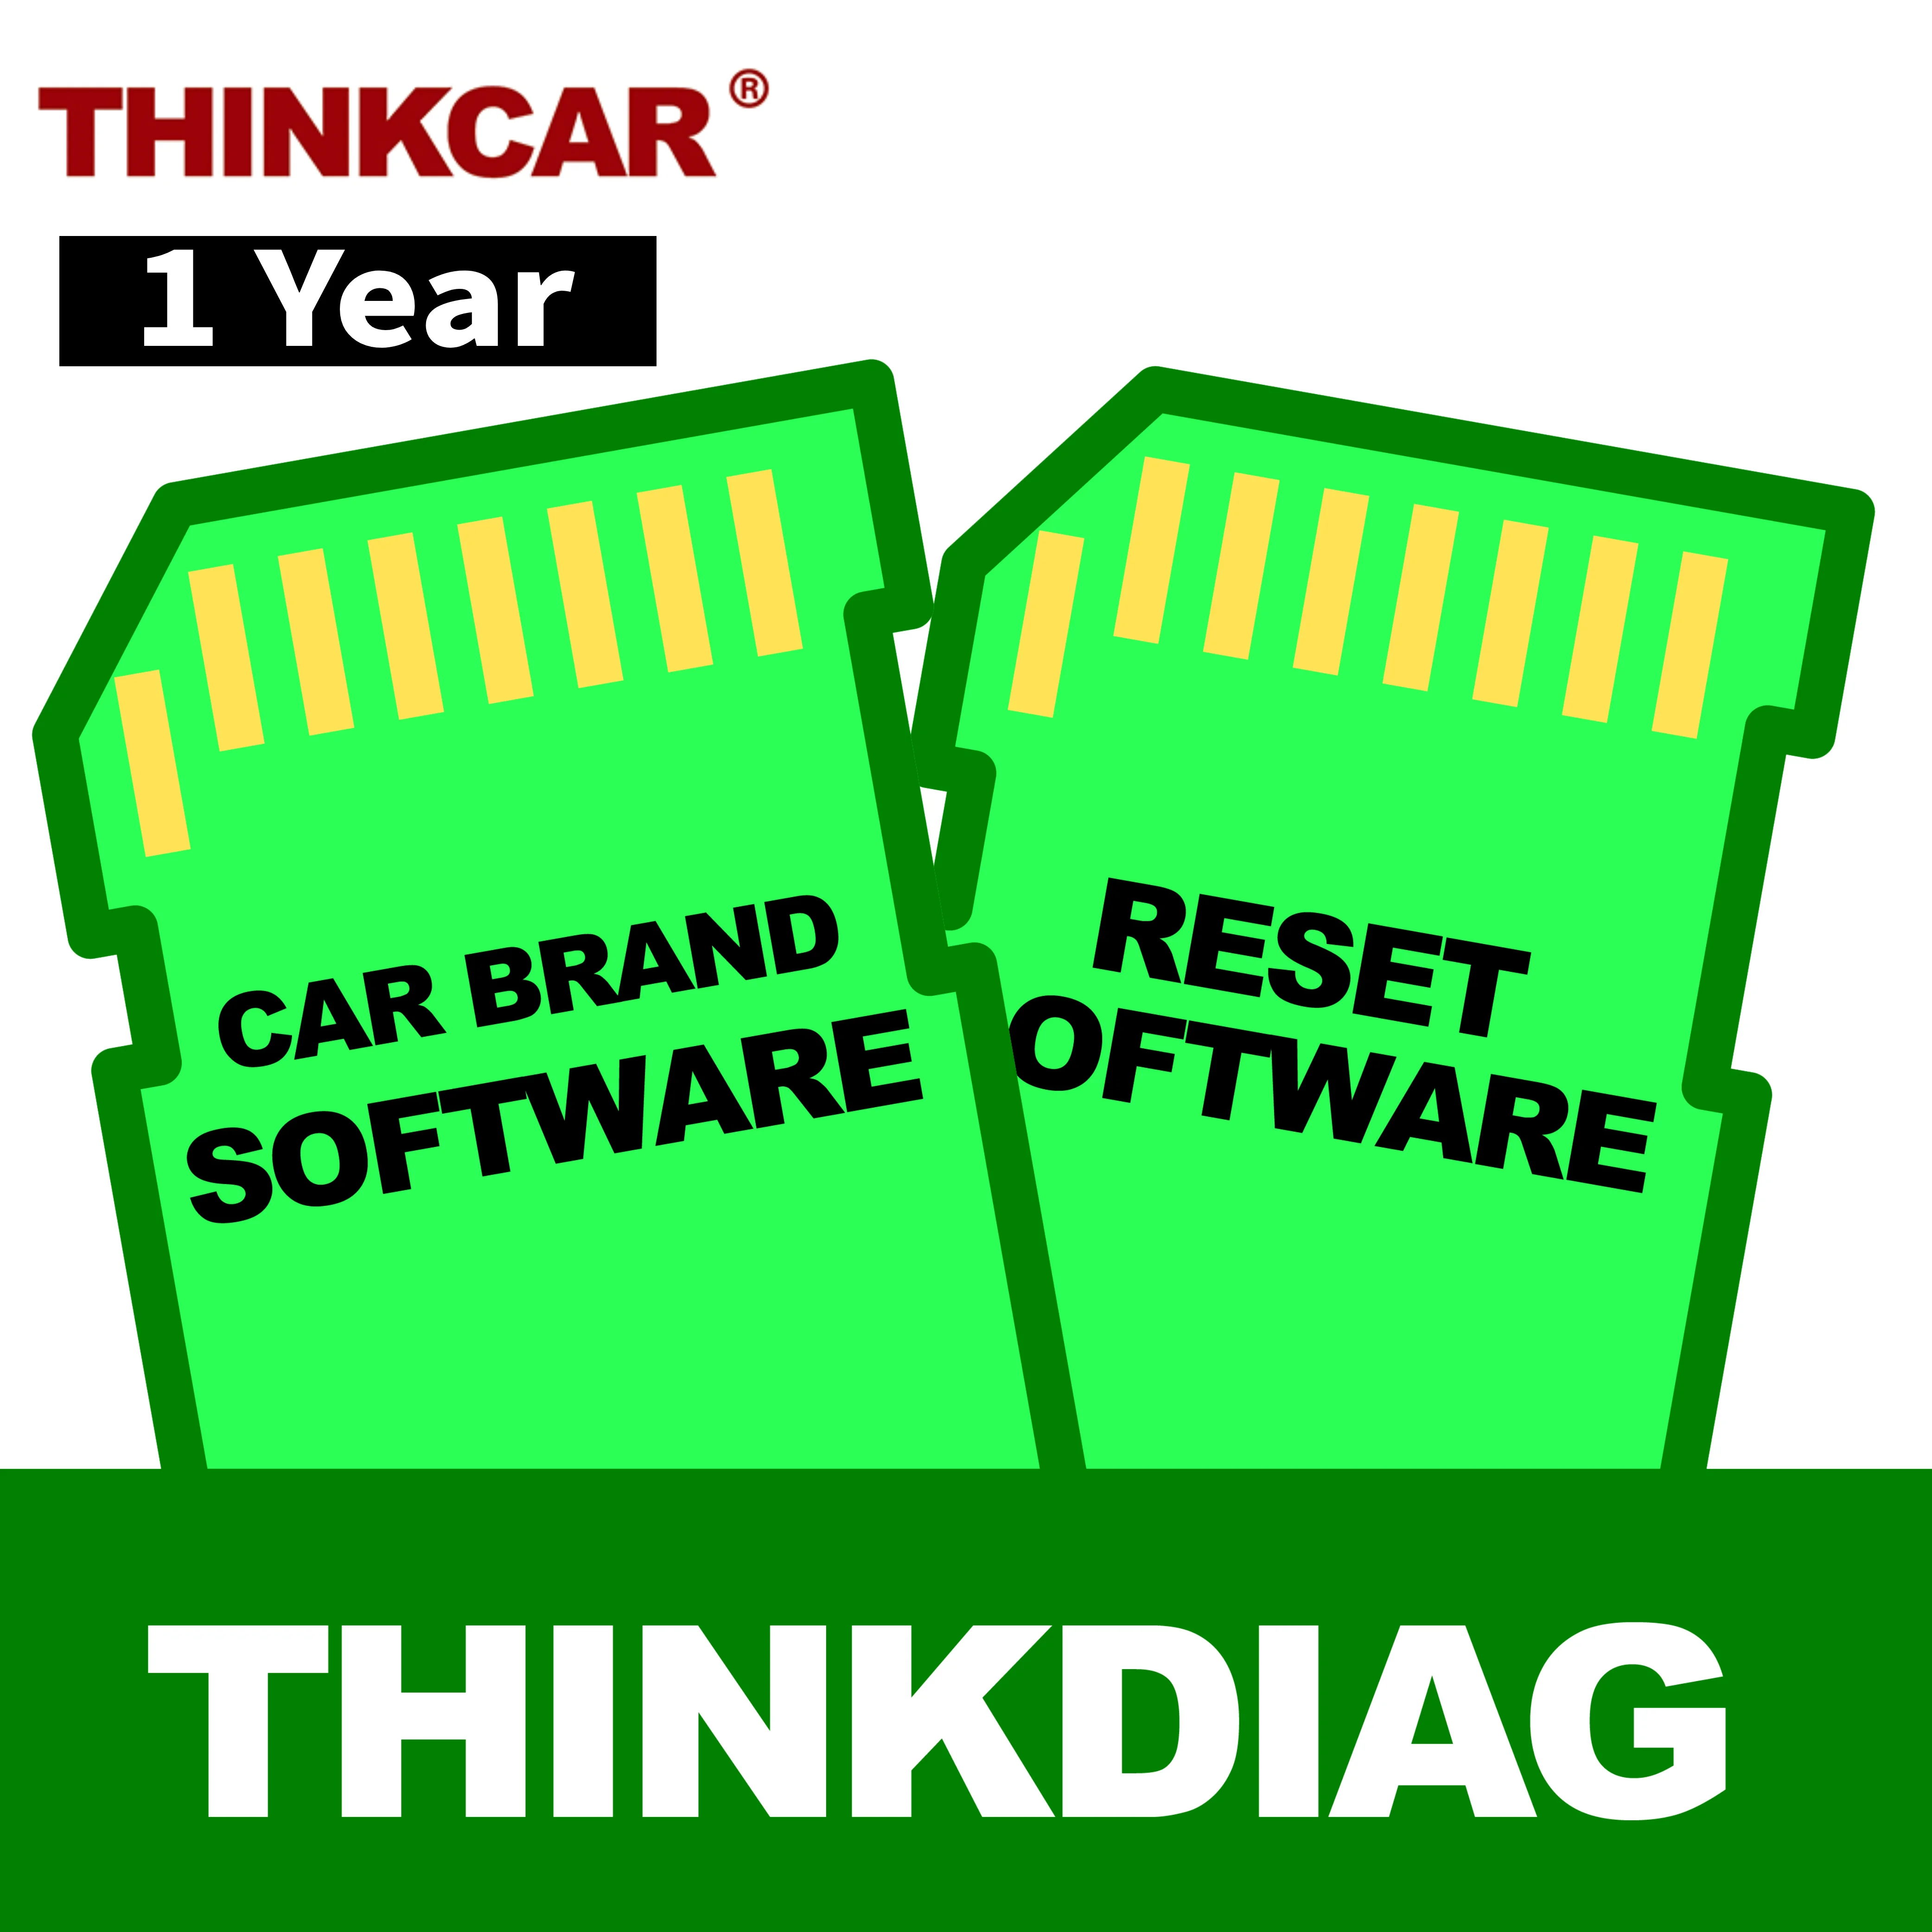 

Thinkcar Thinkdiag Full Software 1 Year Update OBD2 Scanner OE Level Diagnostic Tool 15 Resets Services Support 115 Car Brands